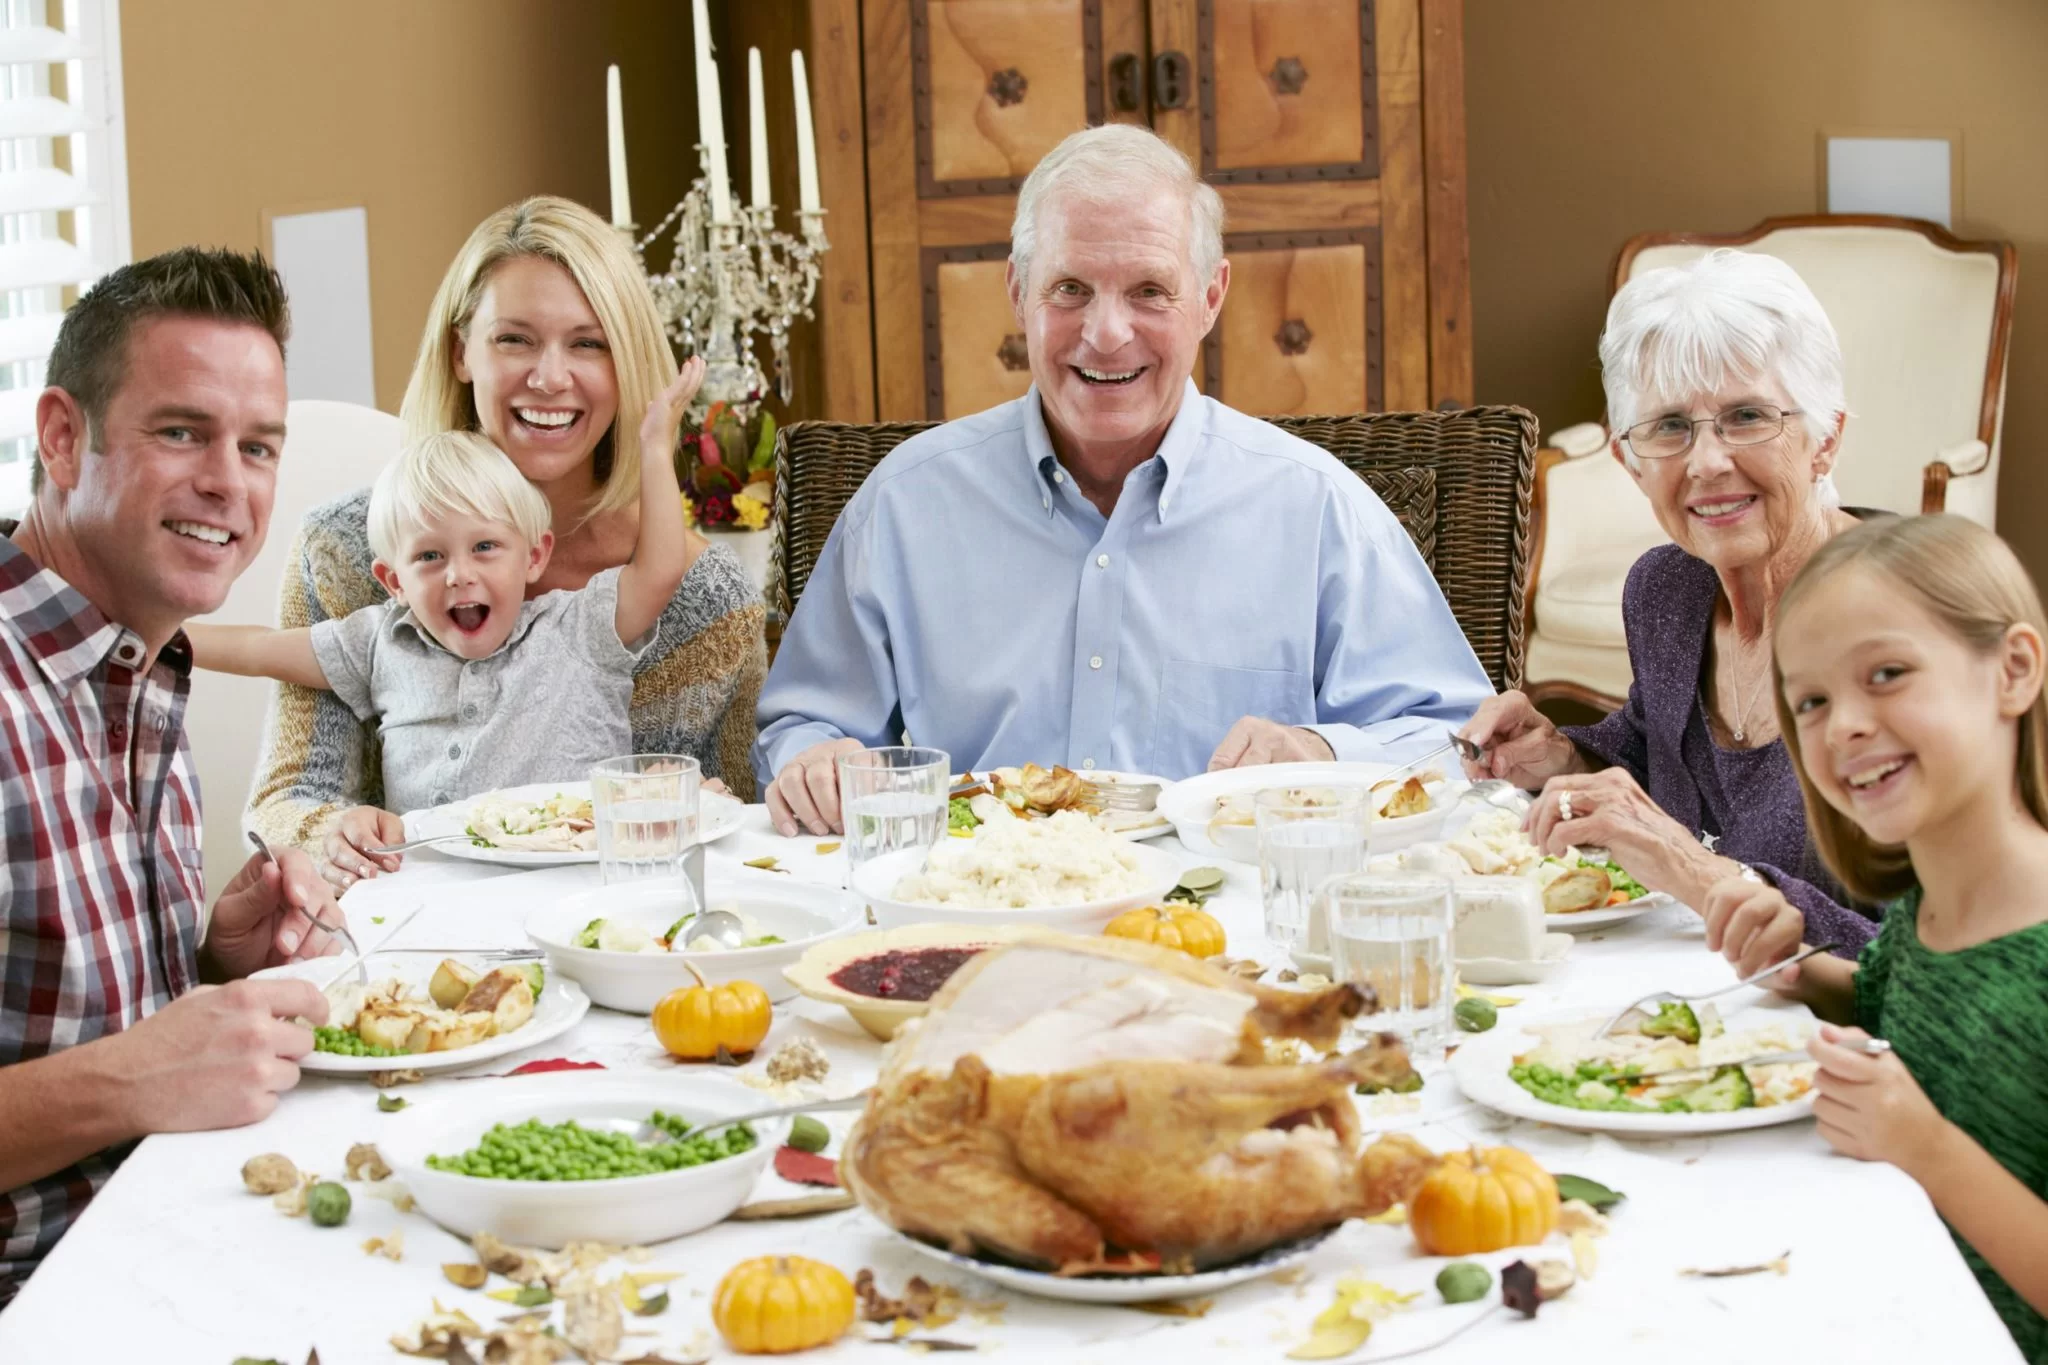 5 Things You Should Teach Your Kids This Thanksgiving